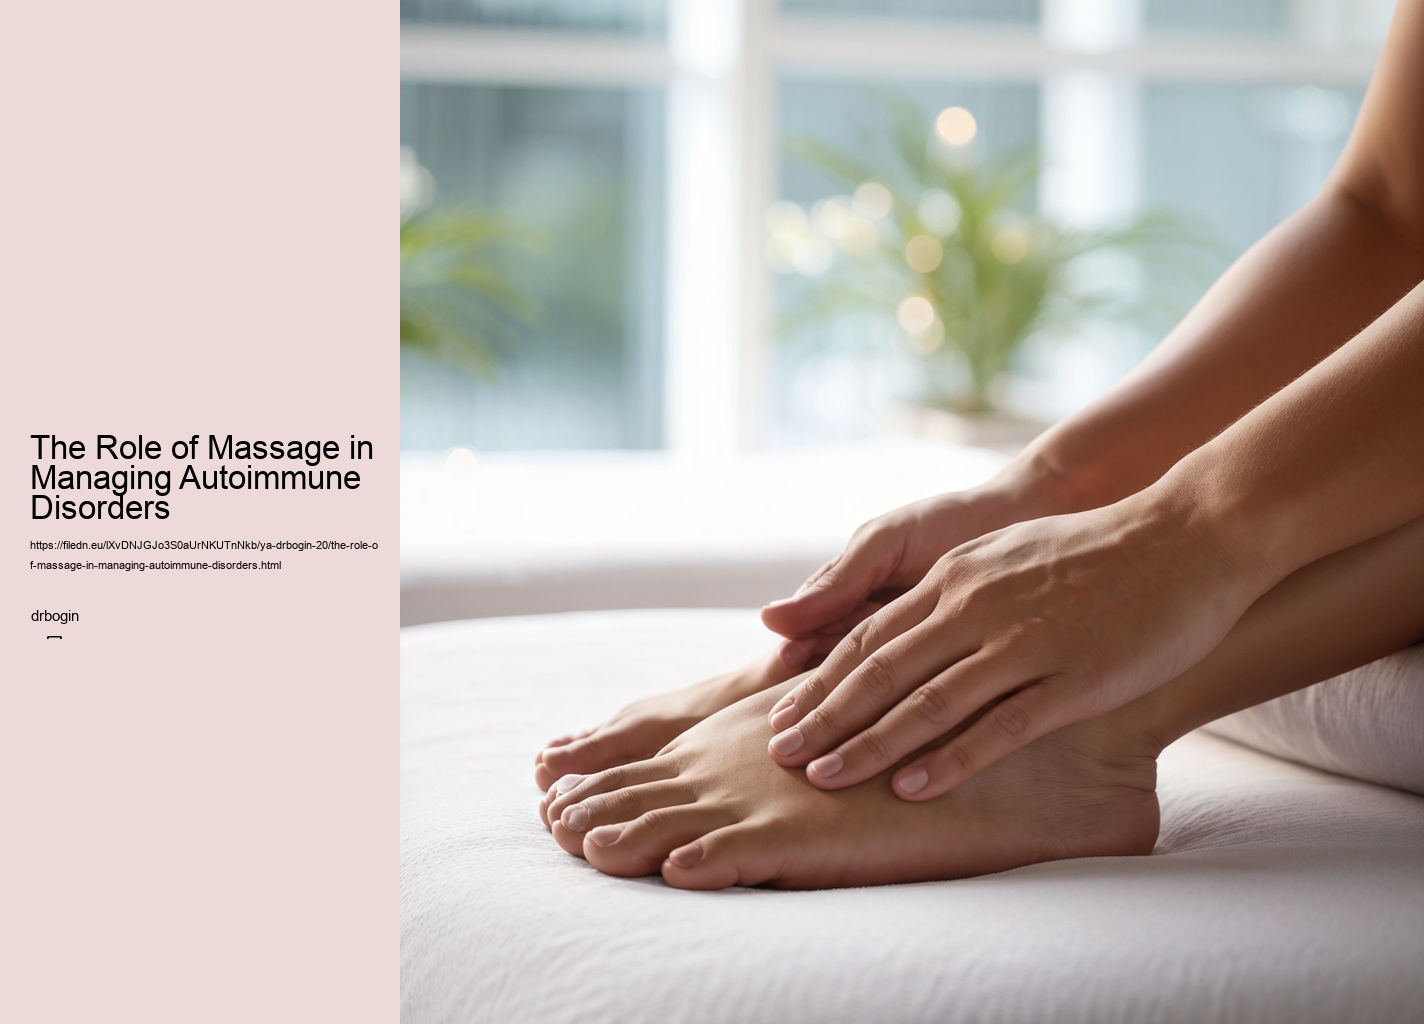 The Role of Massage in Managing Autoimmune Disorders